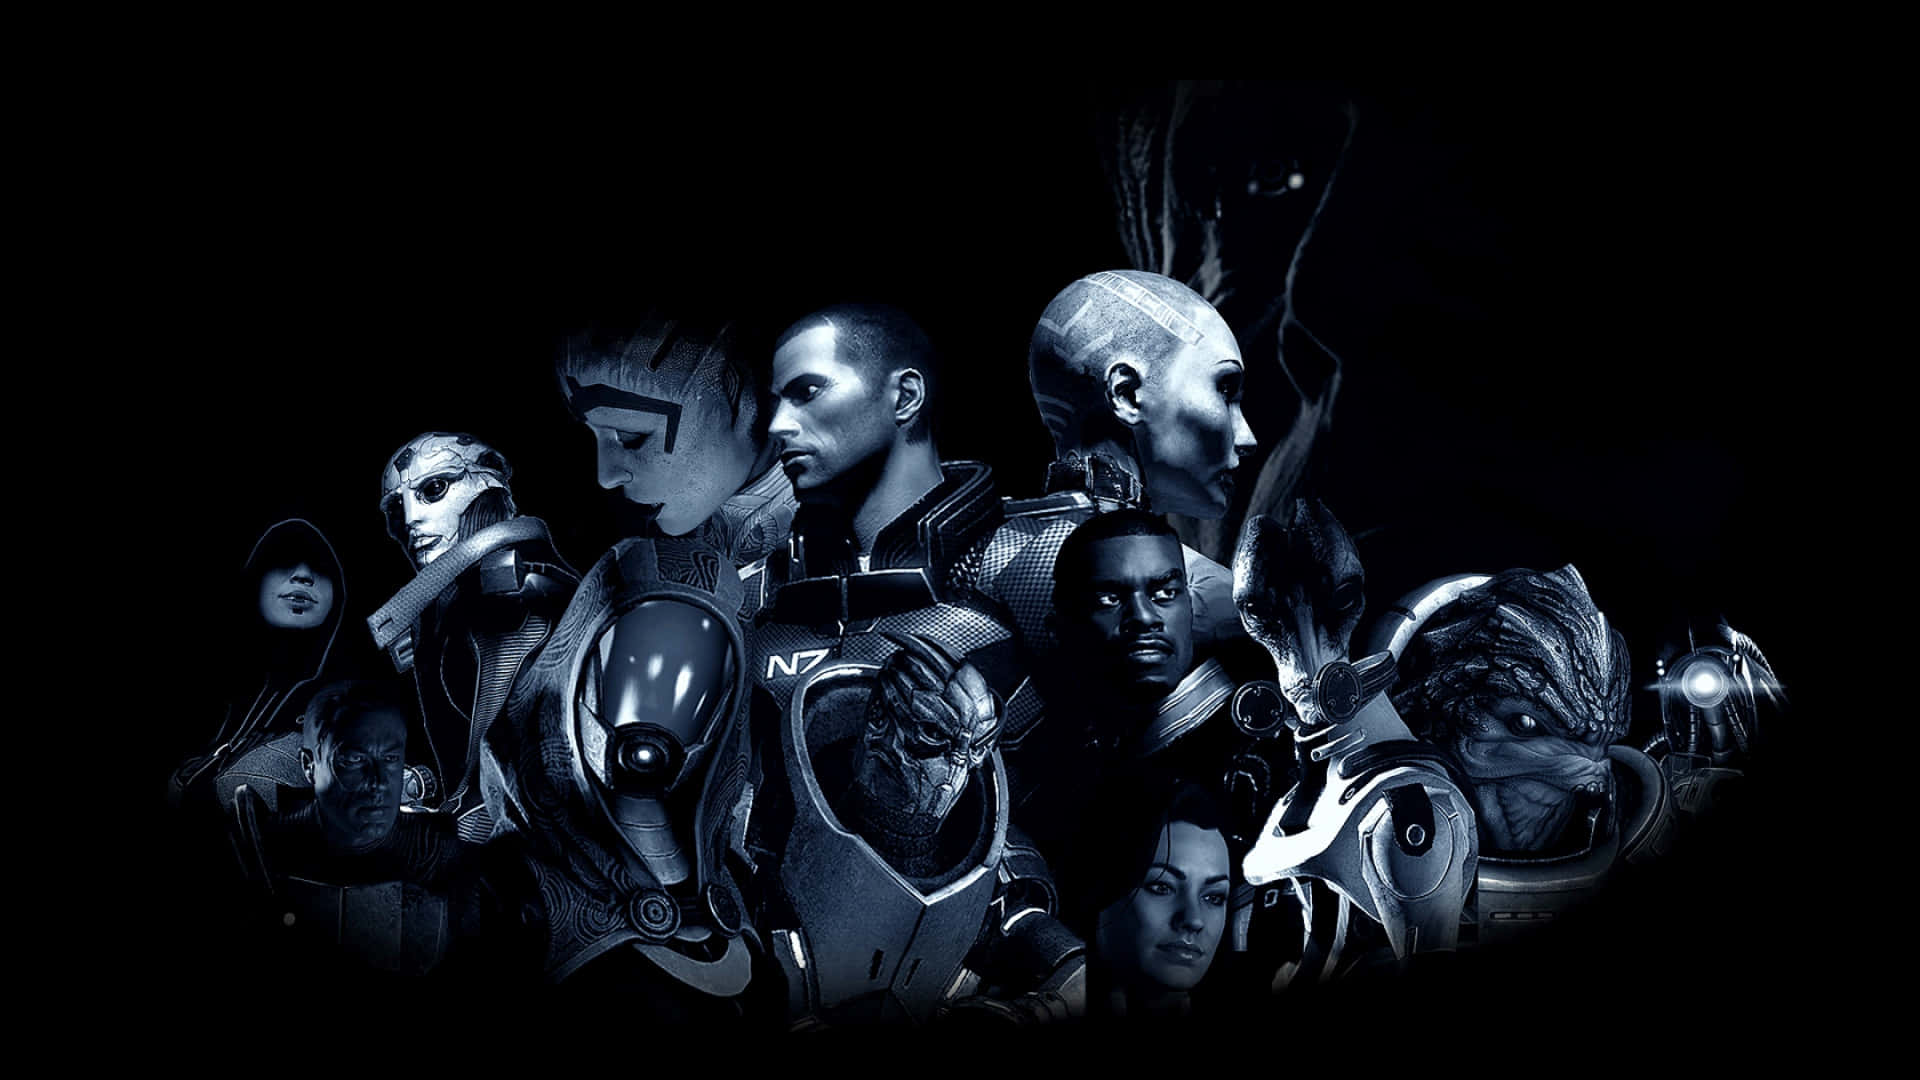 Epic Mass Effect Characters in Action Wallpaper